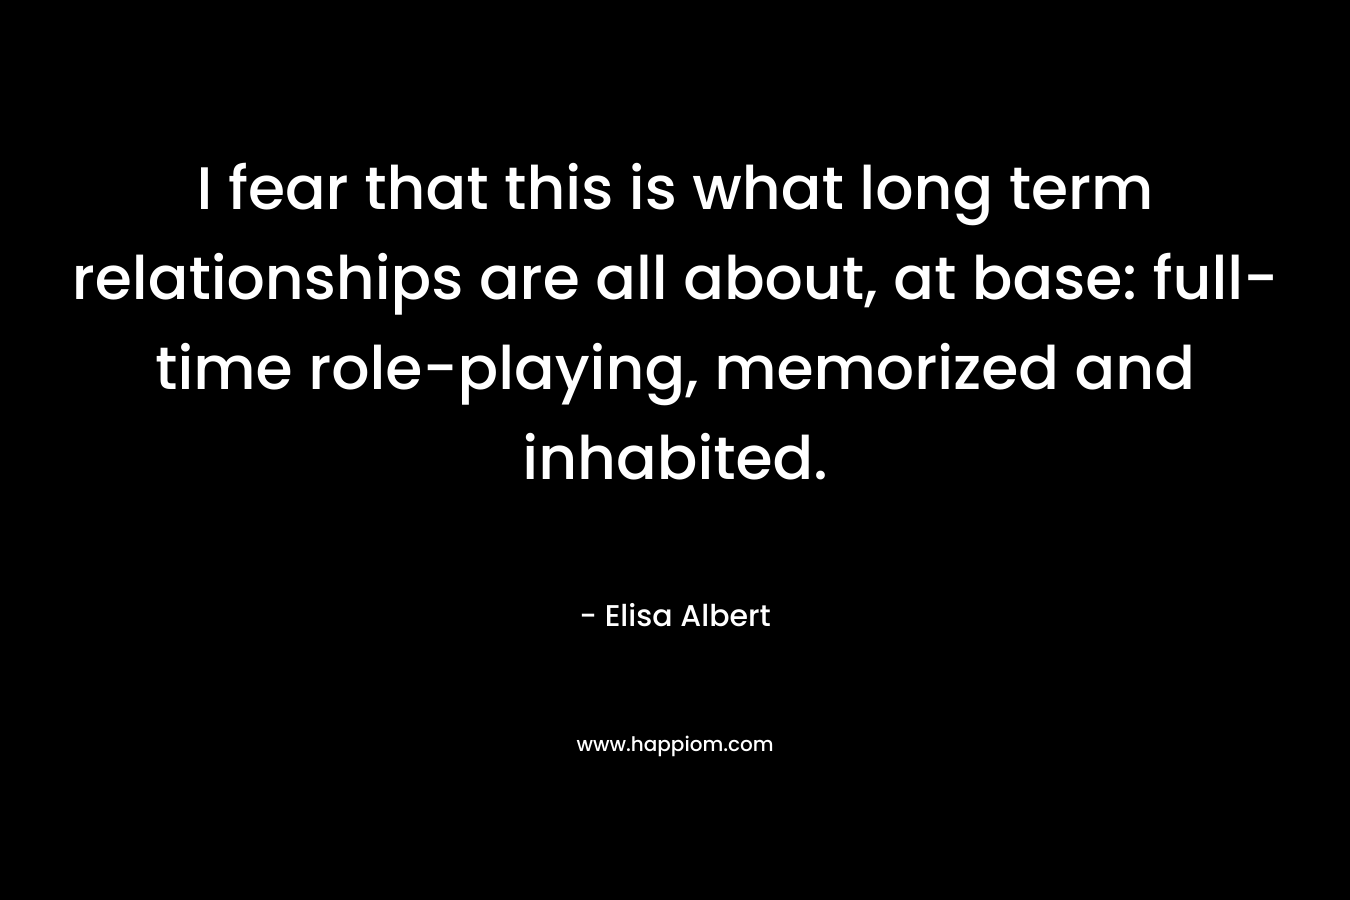 I fear that this is what long term relationships are all about, at base: full-time role-playing, memorized and inhabited. – Elisa Albert